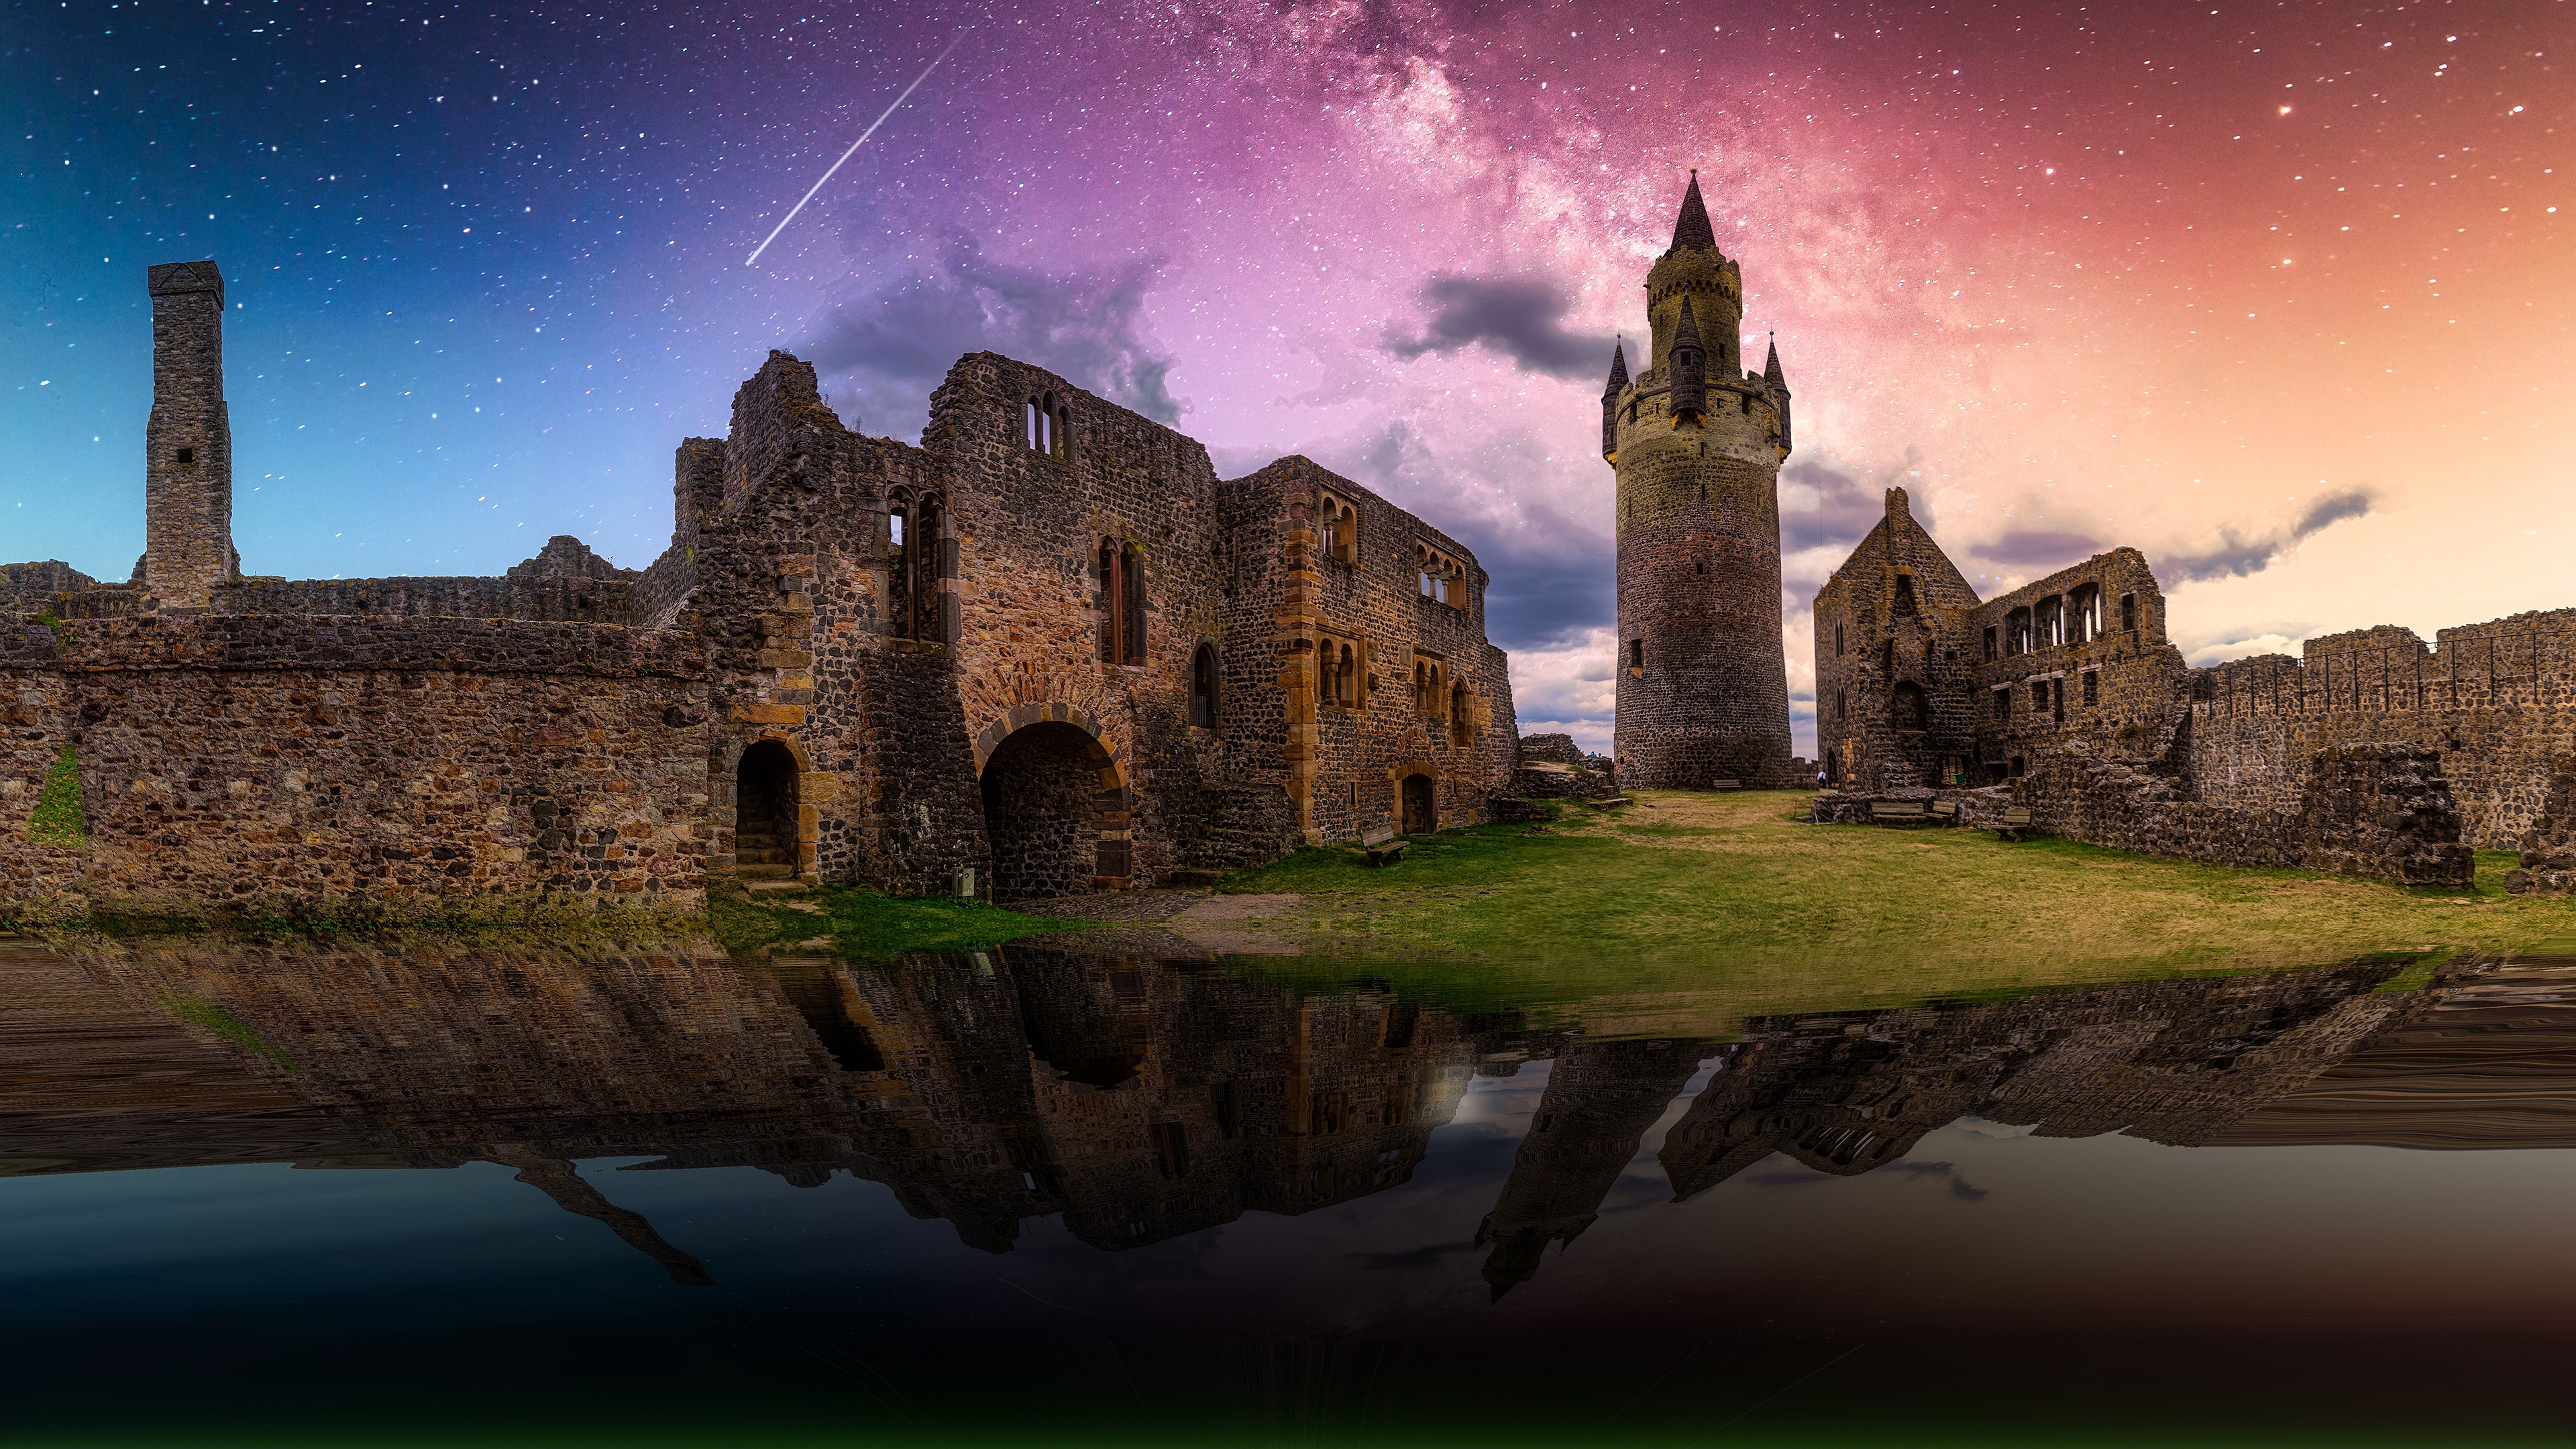 man made, ruin, architecture, castle, cloud, fortress, night, reflection, starry sky, stars